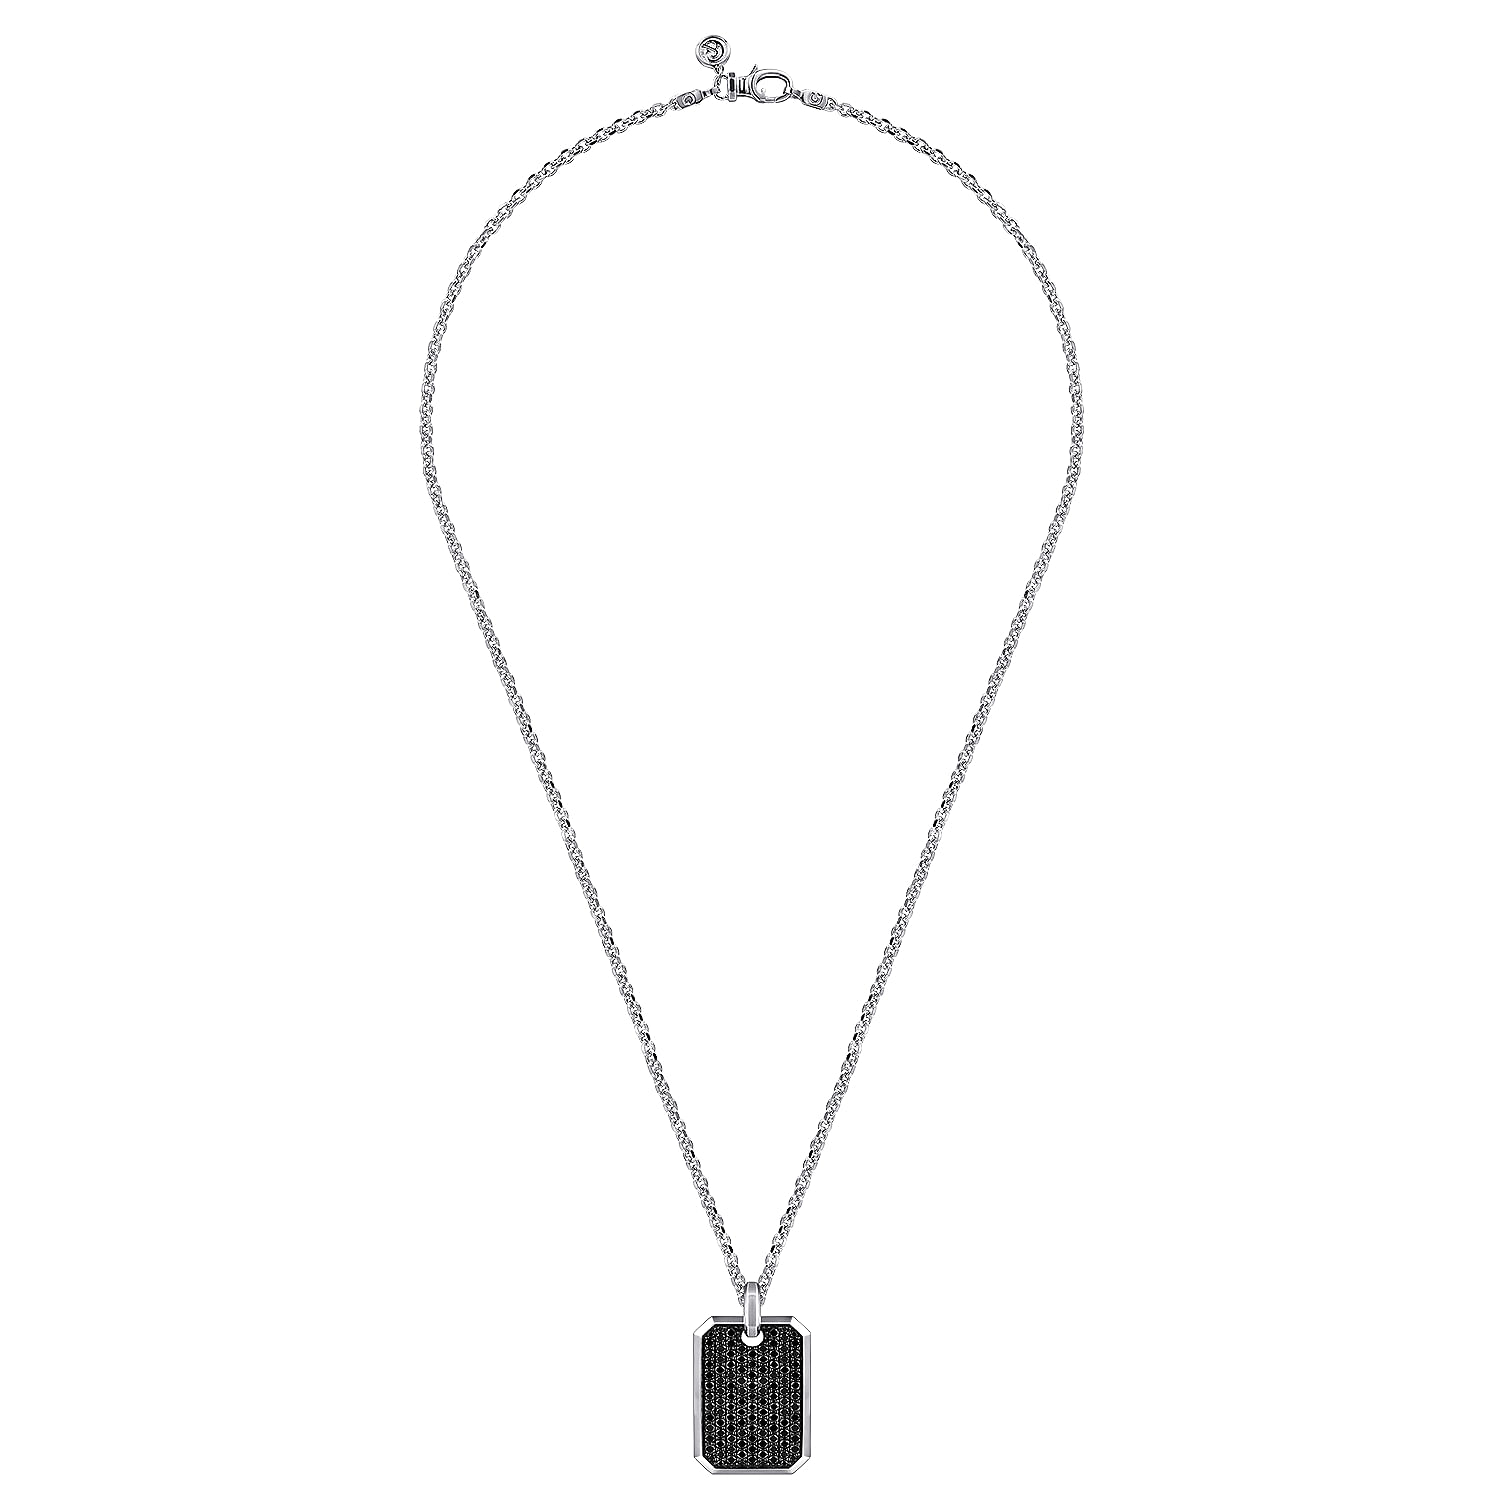 22 Inch 925 Sterling Silver Black Spinel Dog Tag Link Chain Necklace